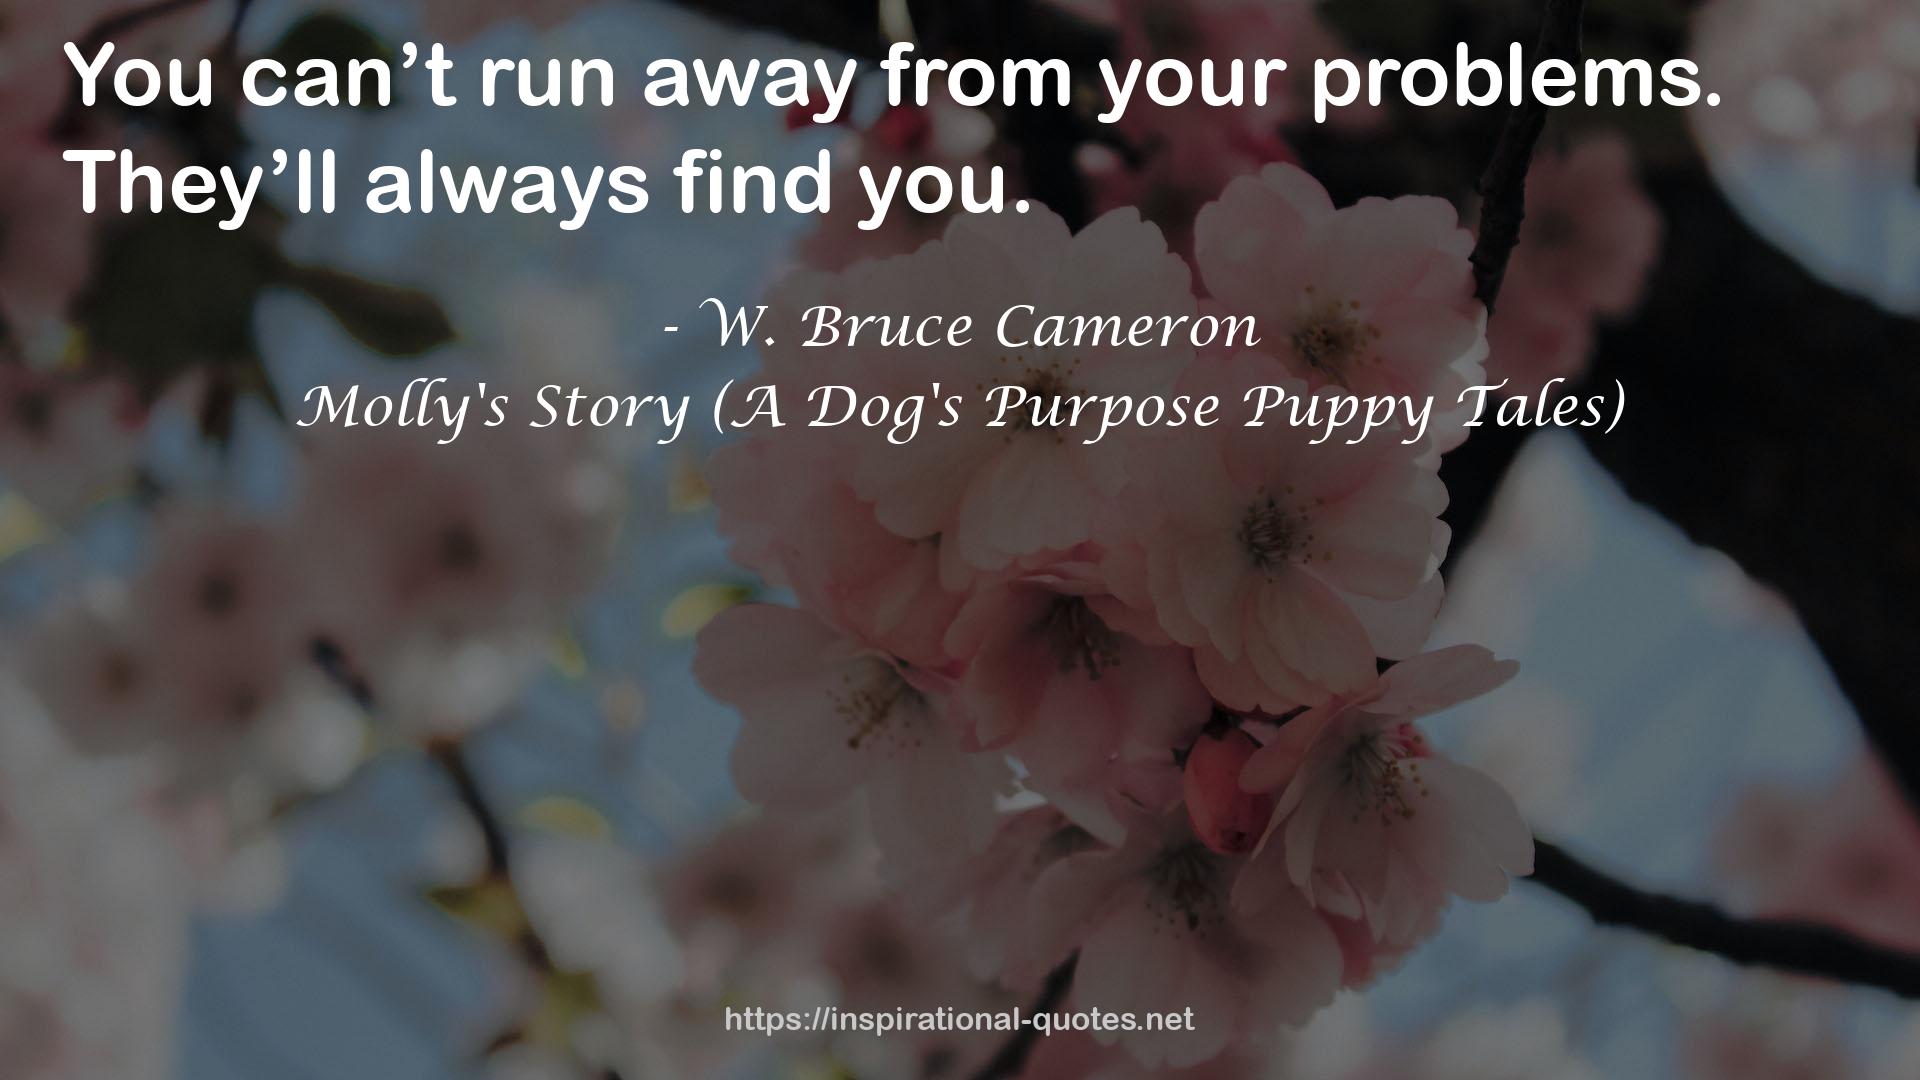 Molly's Story (A Dog's Purpose Puppy Tales) QUOTES